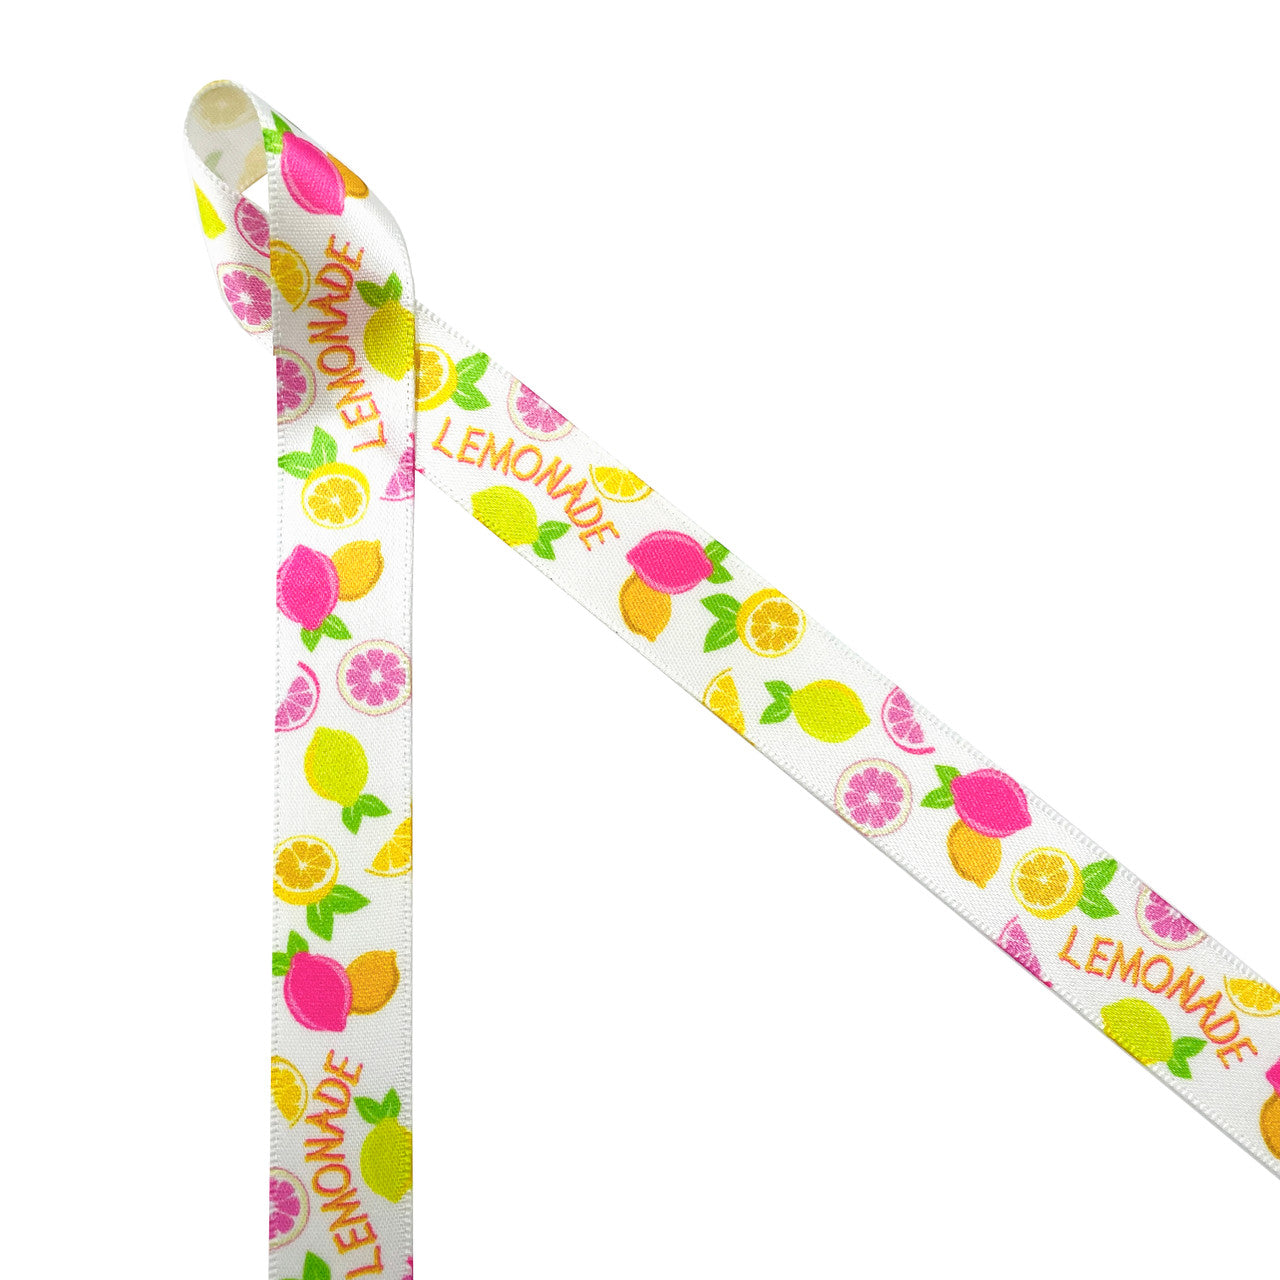 Lemonade ribbon featuring tossed lemons in pink and yellow with the word Lemonade printed on 5/8" white single face satin. This is a fun ribbon for Summer parties, party favors, bridal showers, garden parties, gift wrap, cookies, cake pops and table decor. Use this ribbon for hair bows, crafting, sewing and quilting projects too. All our ribbon is designed and printed in the USA